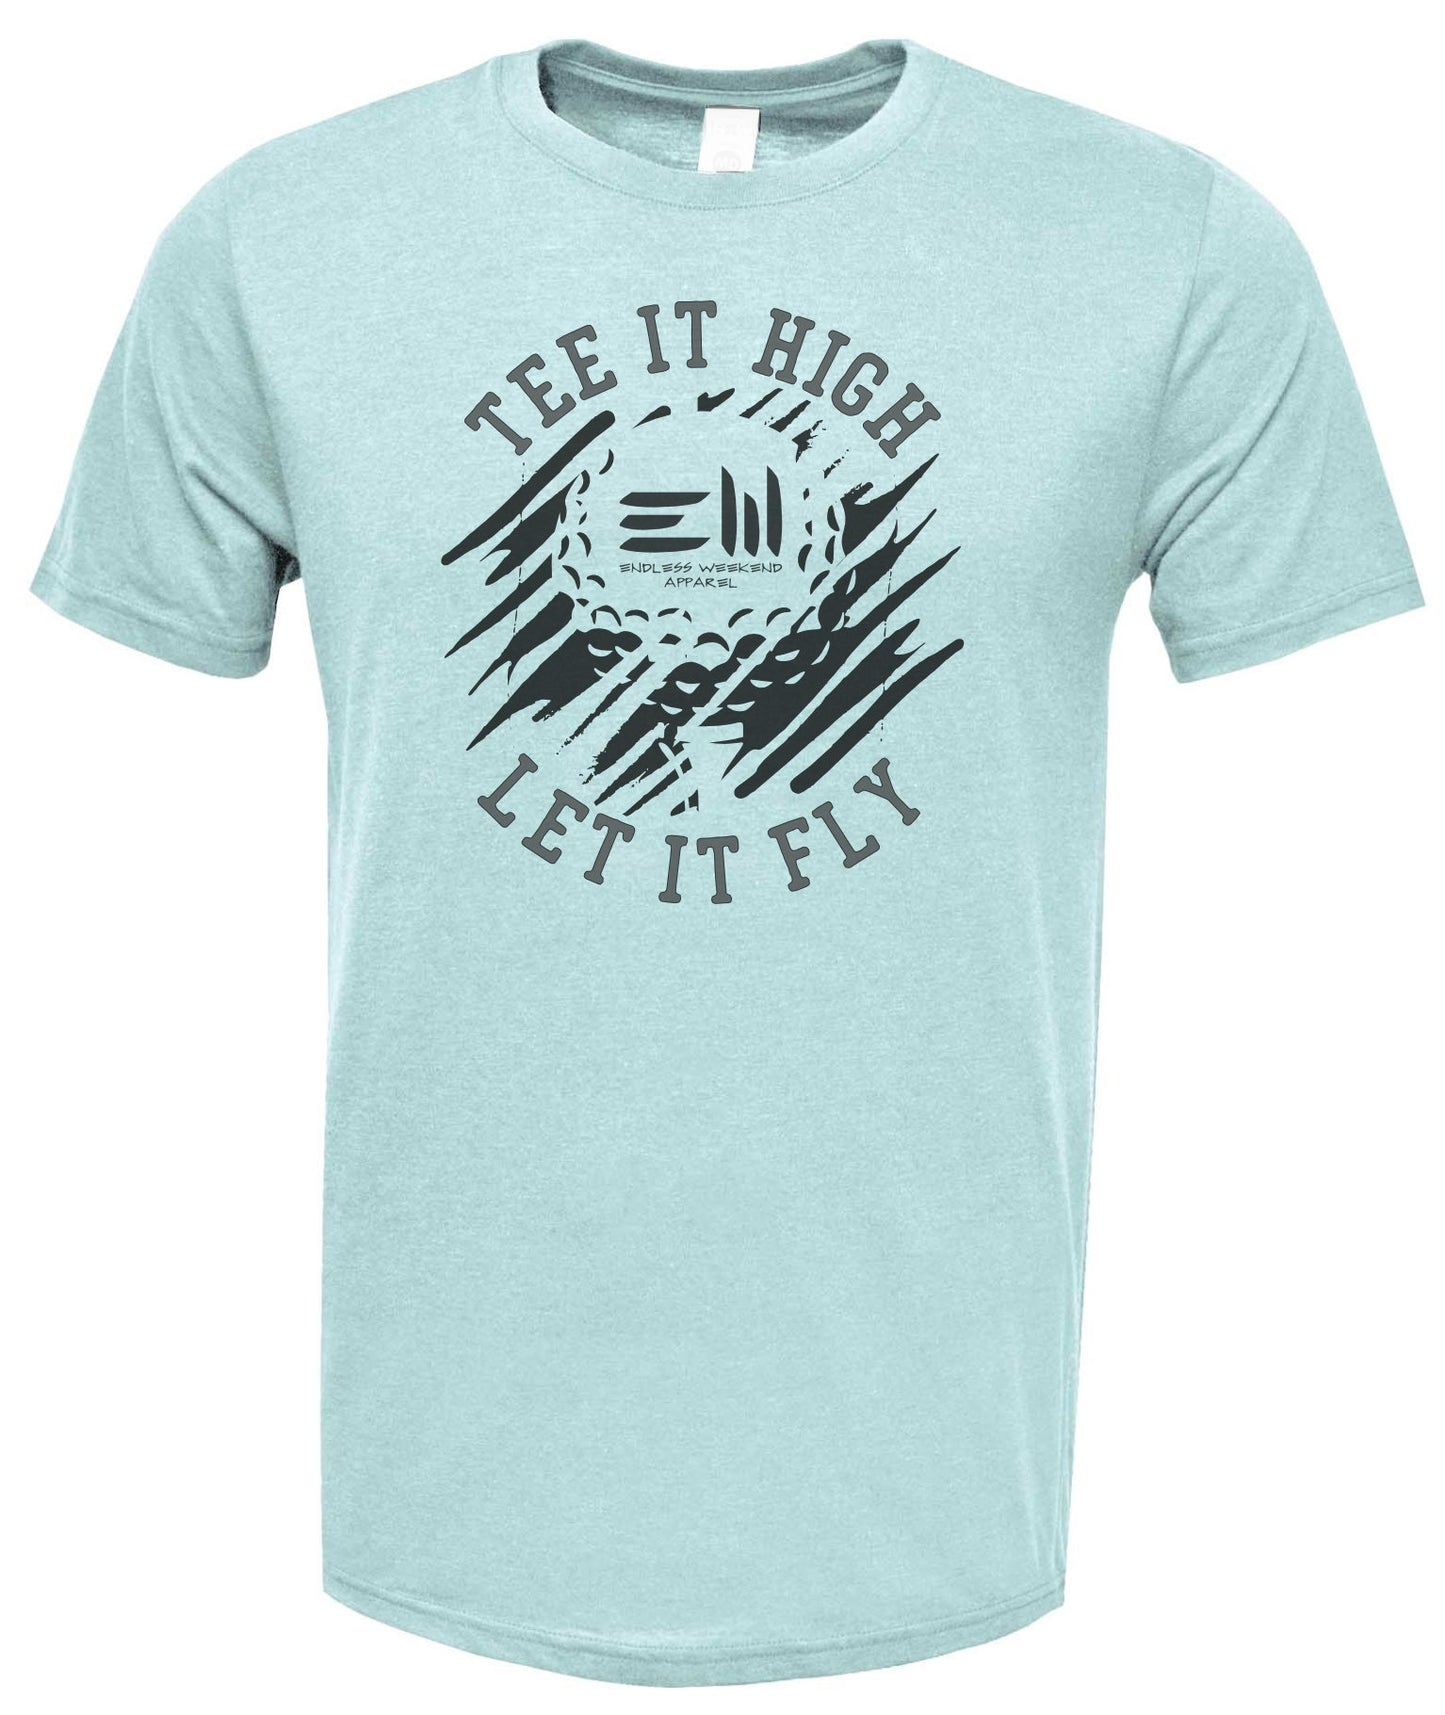 TEE IT HIGH LET IT FLY GOLF SHIRT